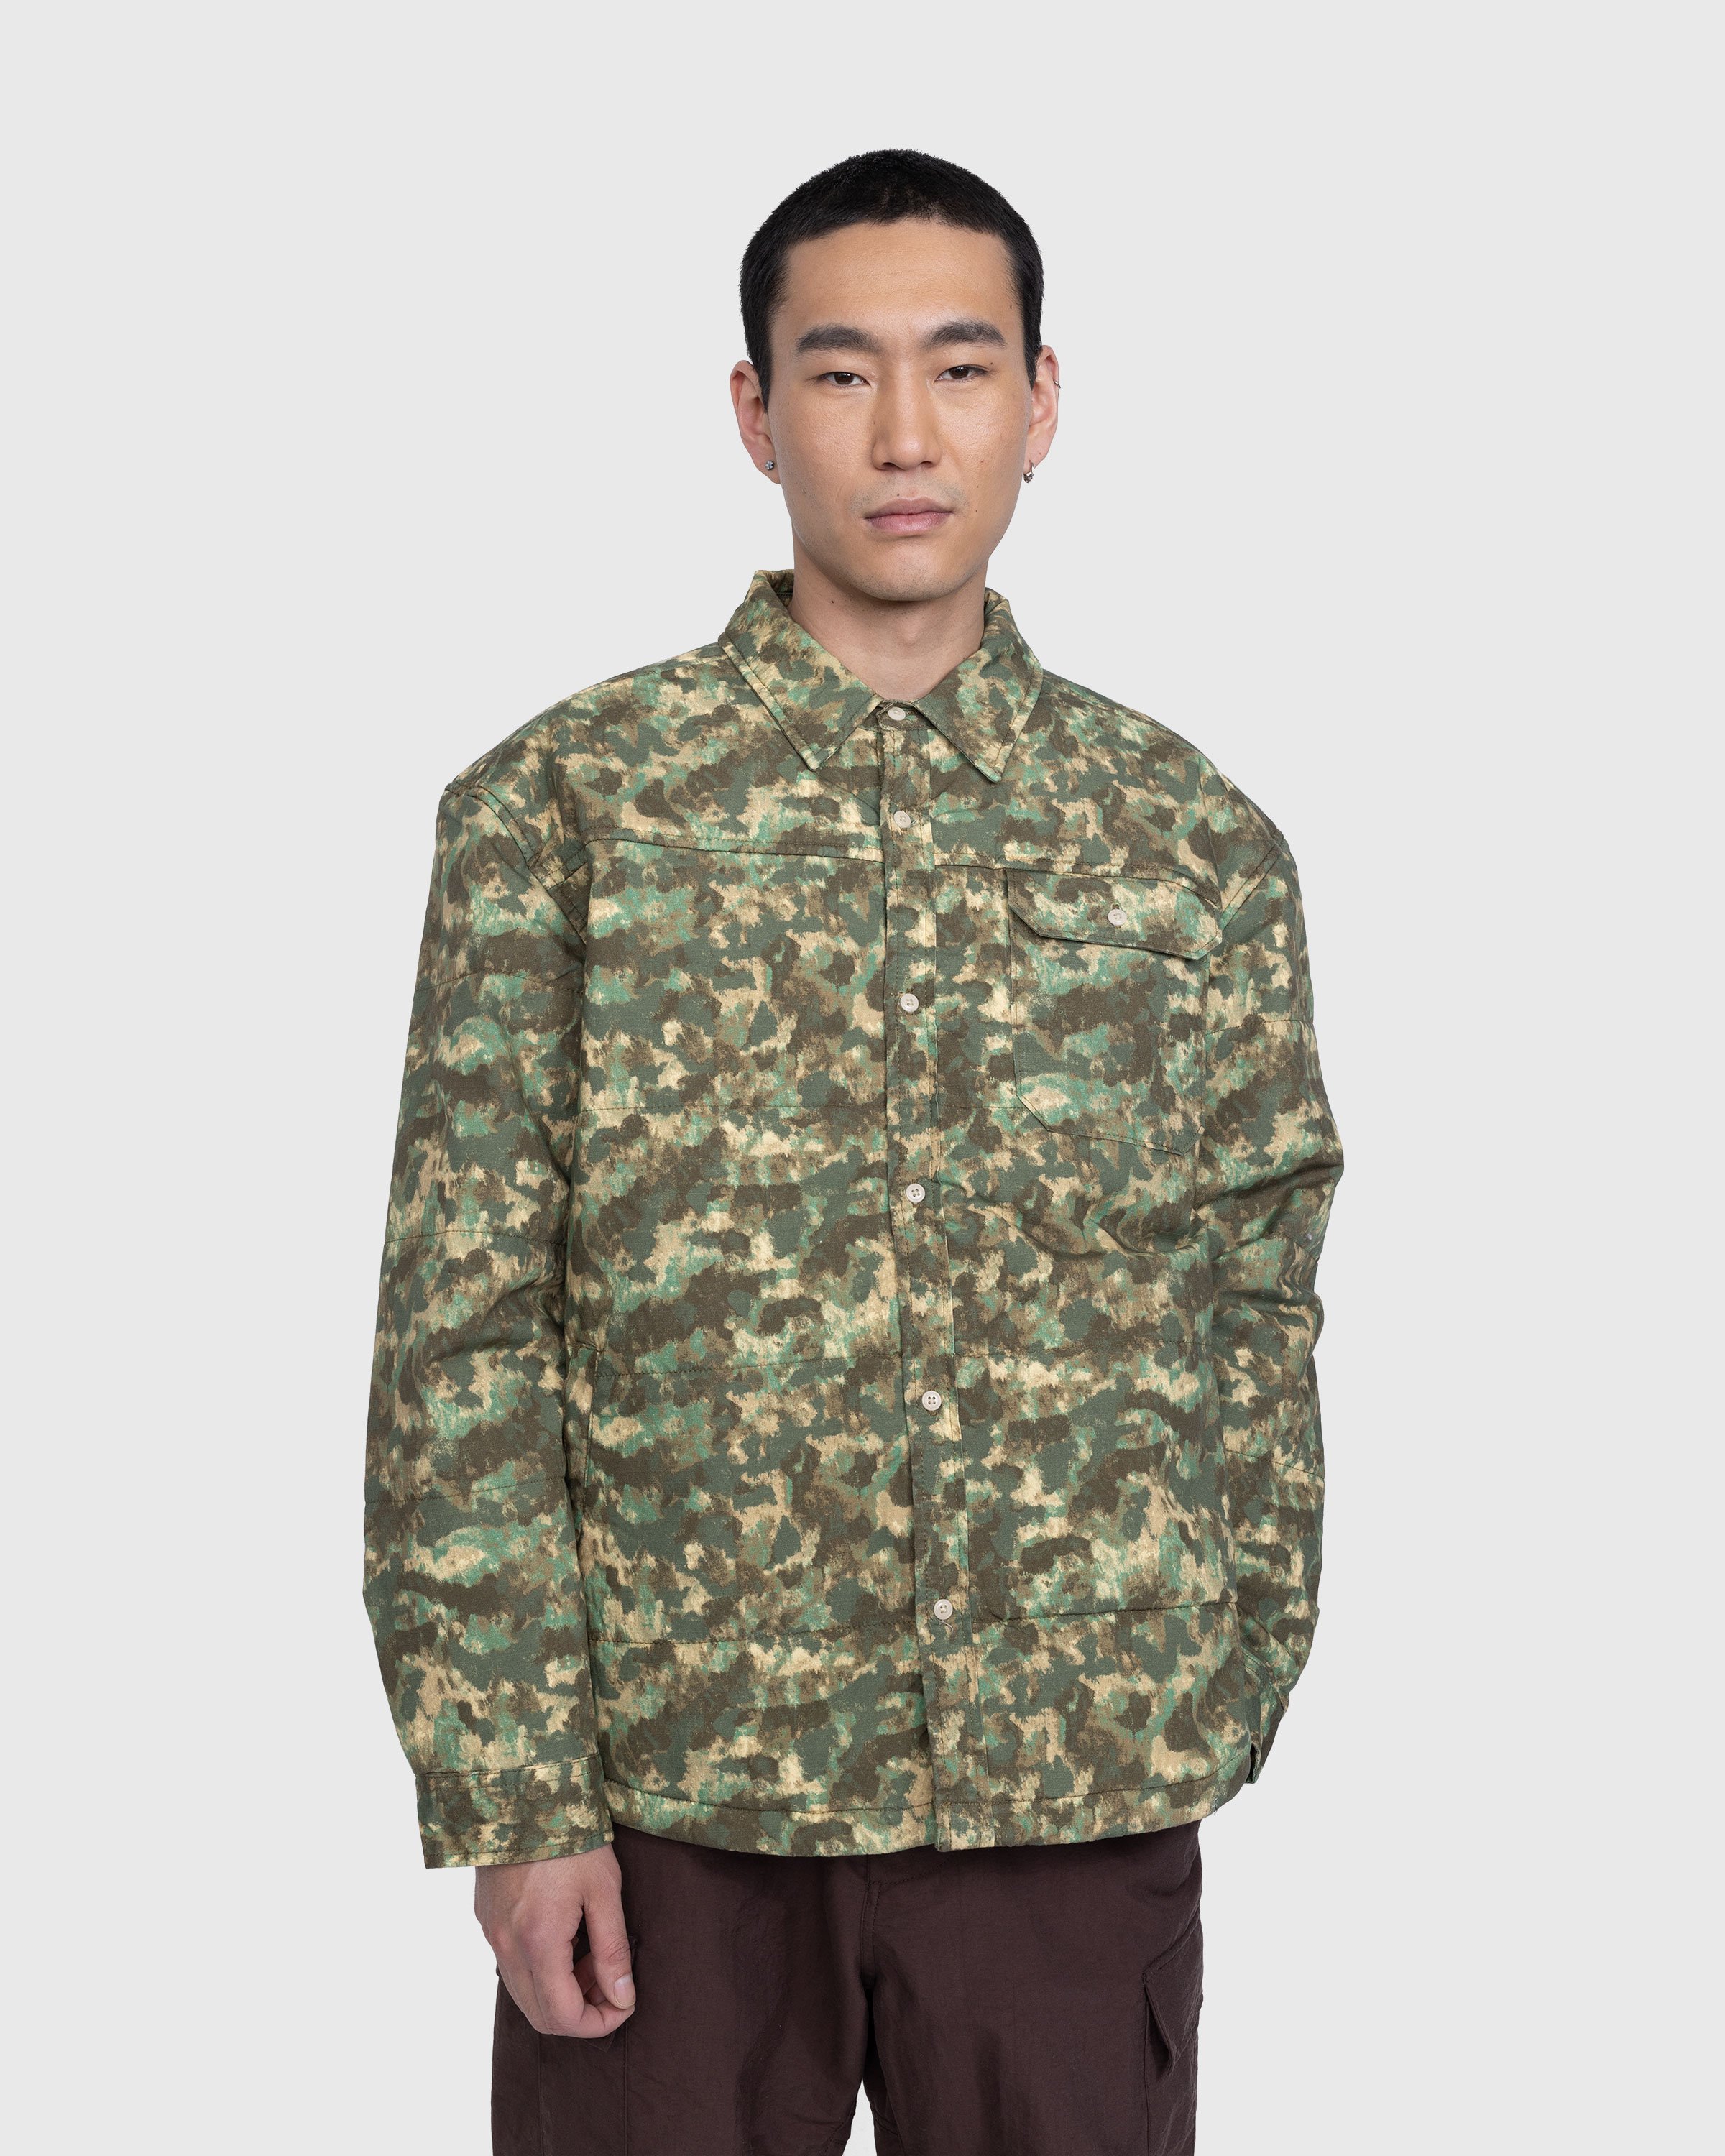 The North Face - M66 Utility Rain Jacket Military Olive/Stippled Camo Print - Clothing - Green - Image 2